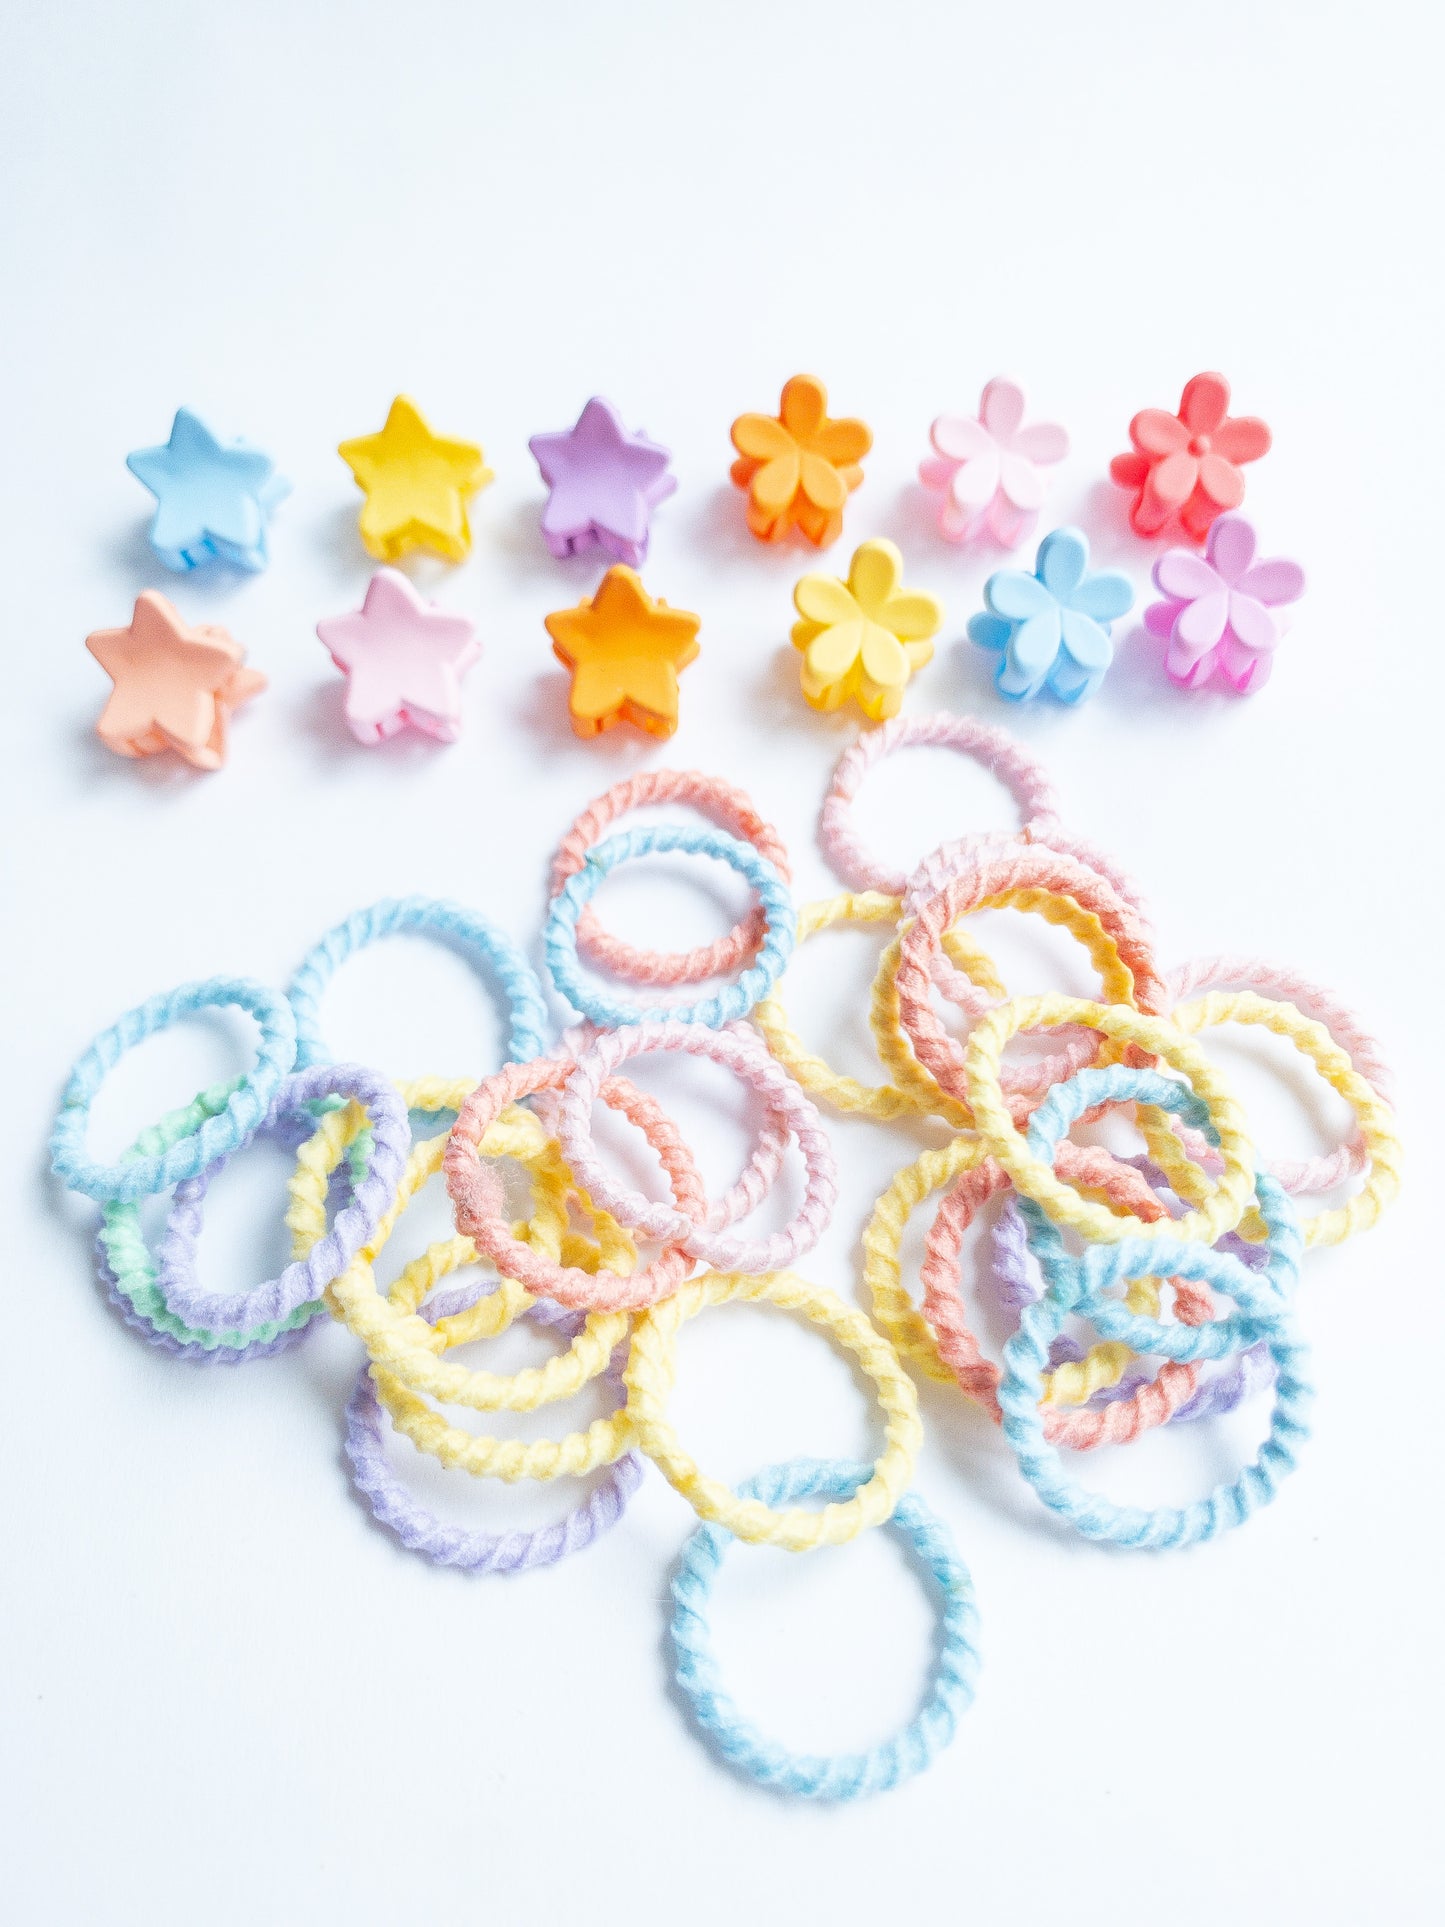 This mini hair claw set is the one you need! A boxed set with a mix of mini flower hair claws and a mix of mini star hair claws along with small hair ties. The hair ties are super soft, no tug and thin, perfect for those cute pigtails or braids. Clip the hair claws throughout to make that fun style.